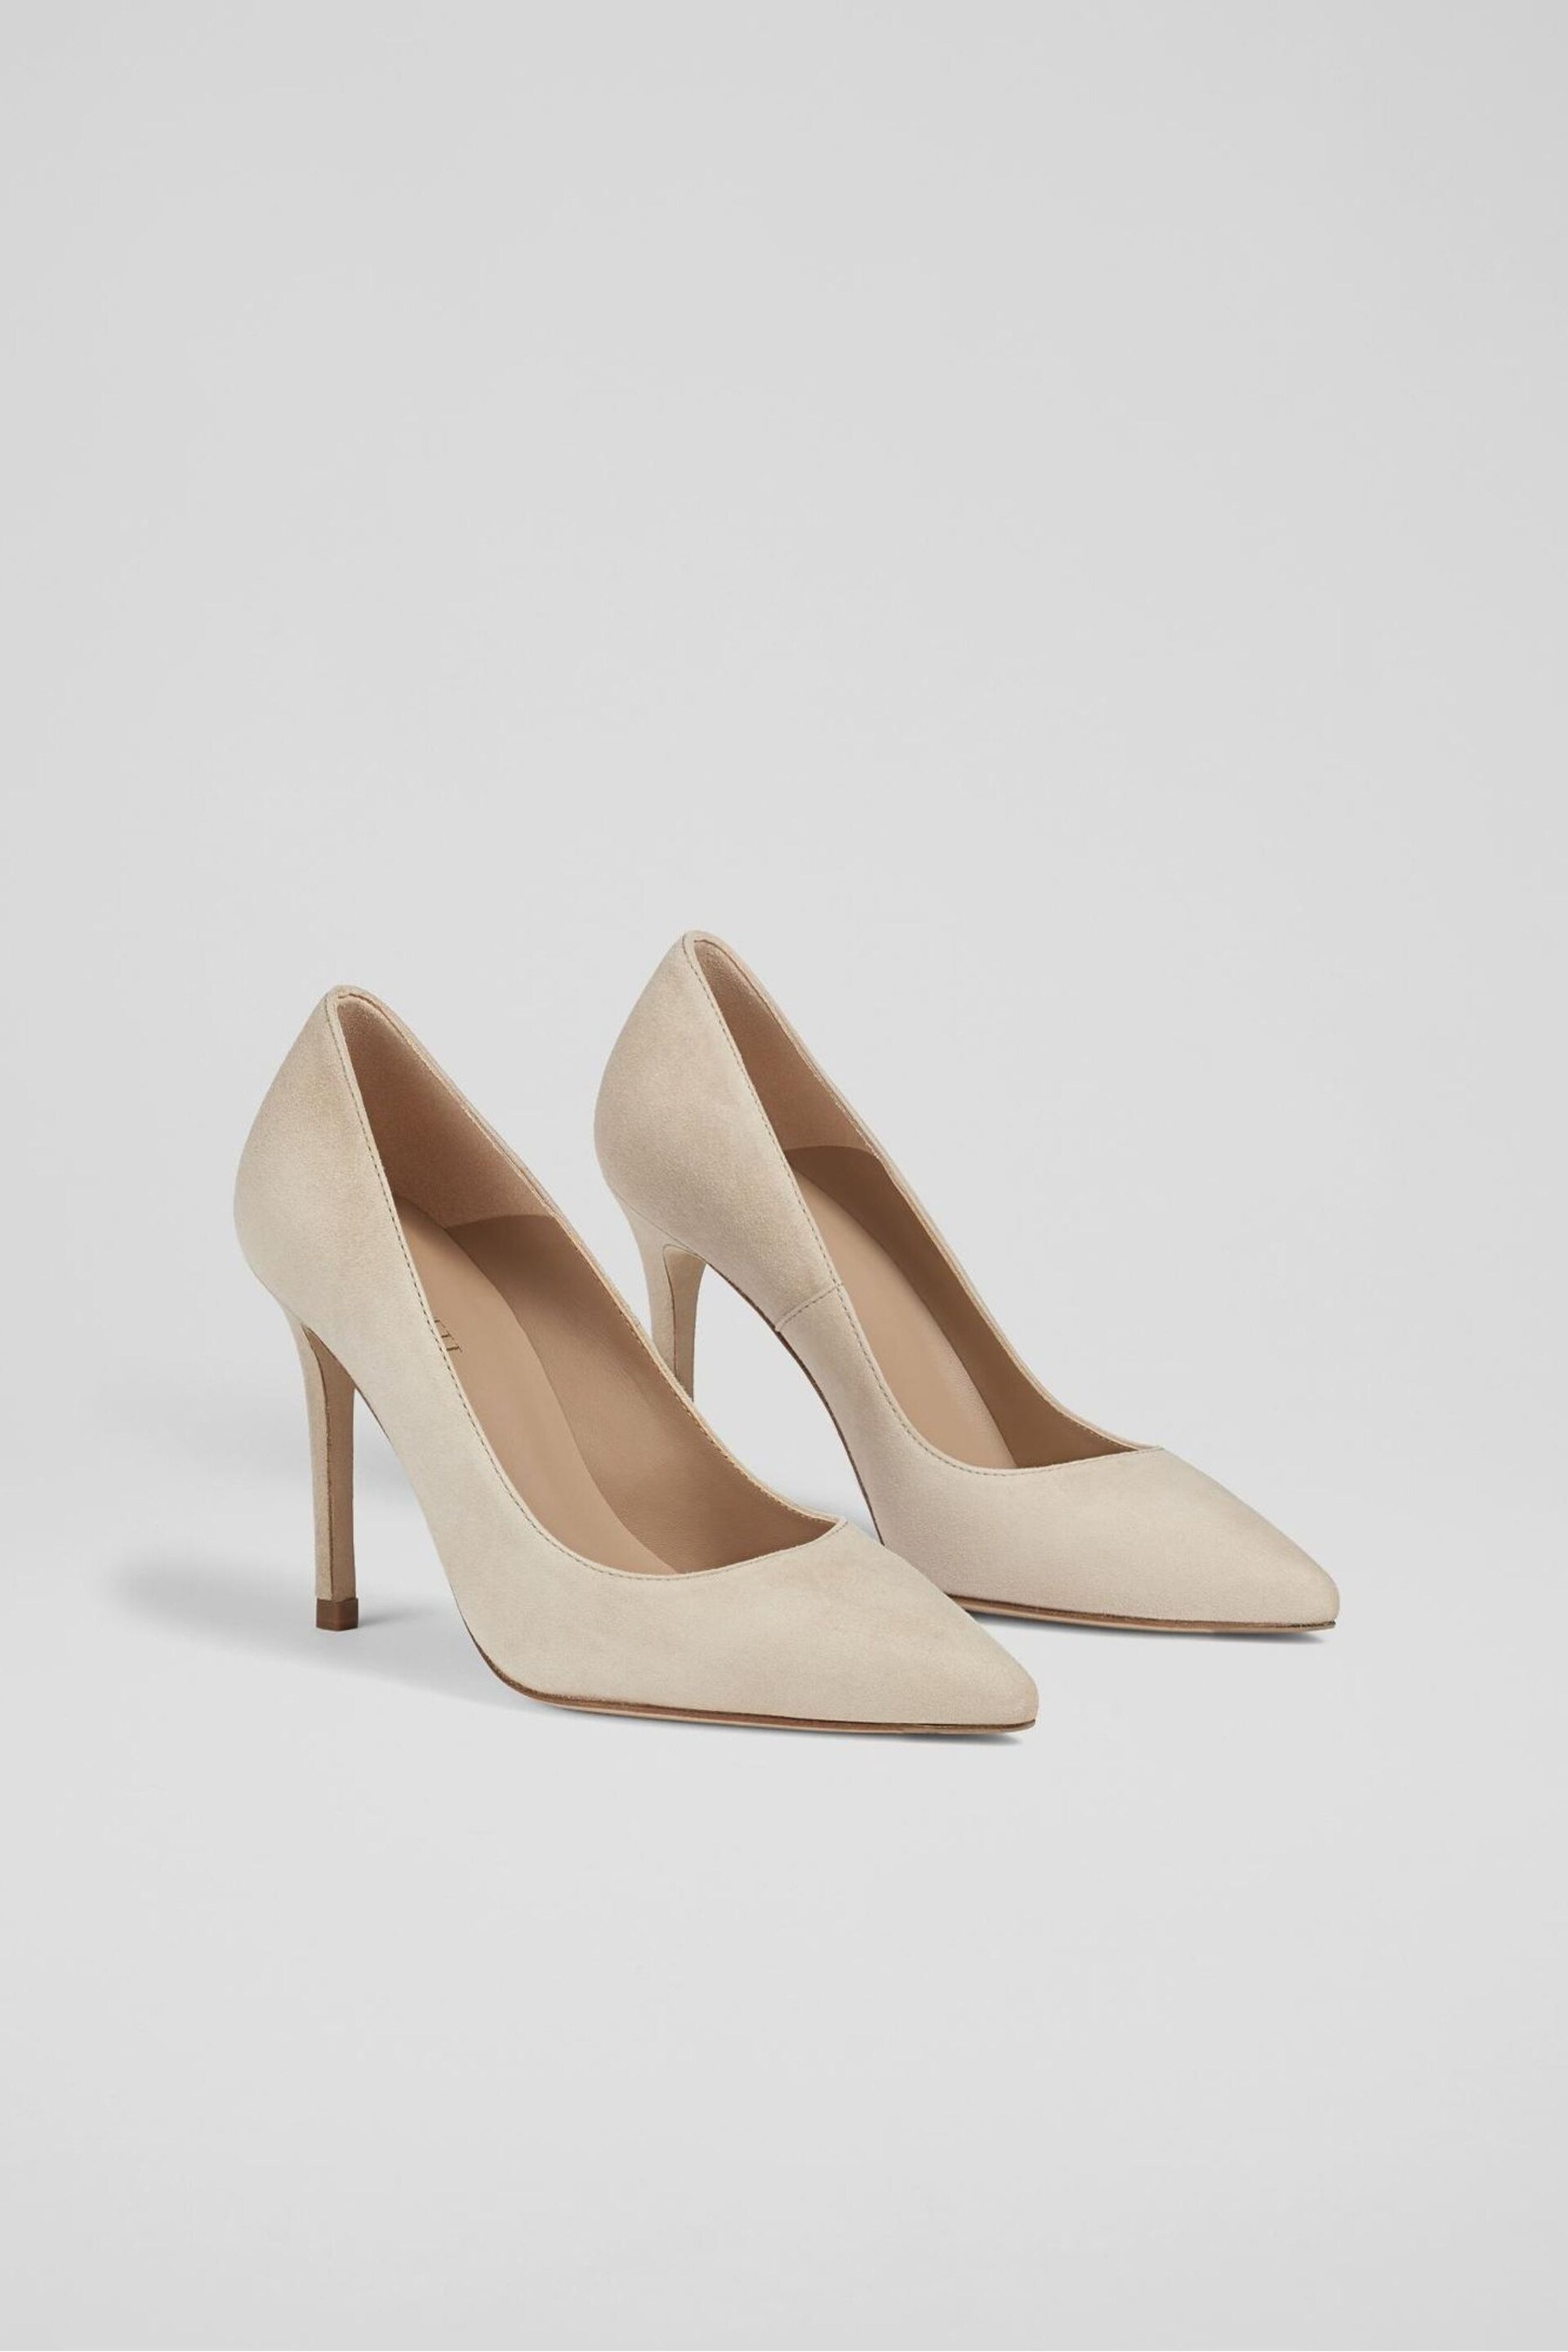 LK Bennett Fern Suede Pointed Toe Courts - Image 2 of 4